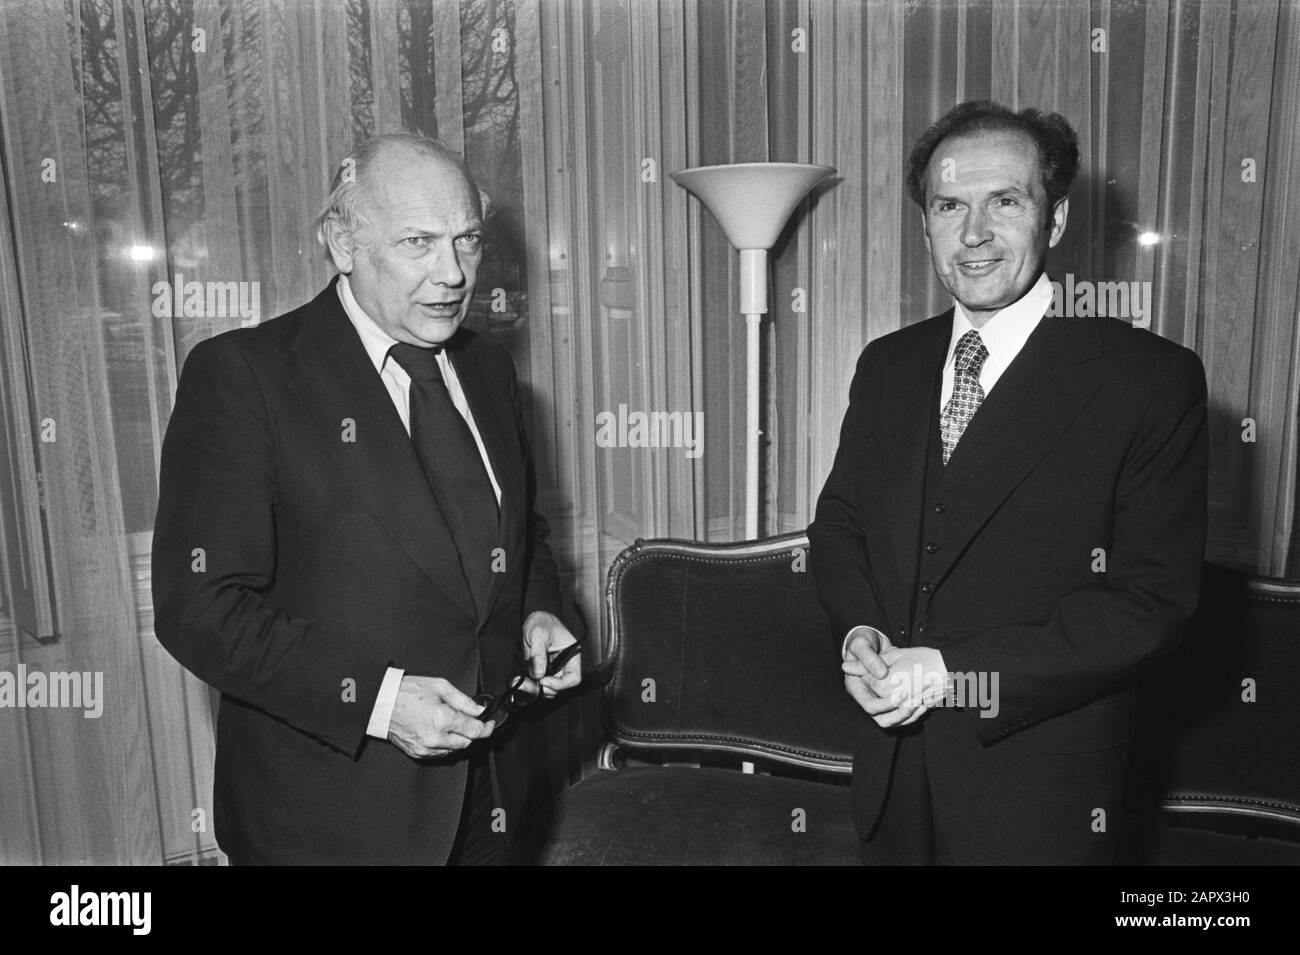 Premier Den Uyl receives Minister Foreign Affairs of the GDR, Oskar Fischer Date: 24 January 1977 Location: D.D.R., Germany Keywords: ministers Personal name: Uyl, Joop den Stock Photo